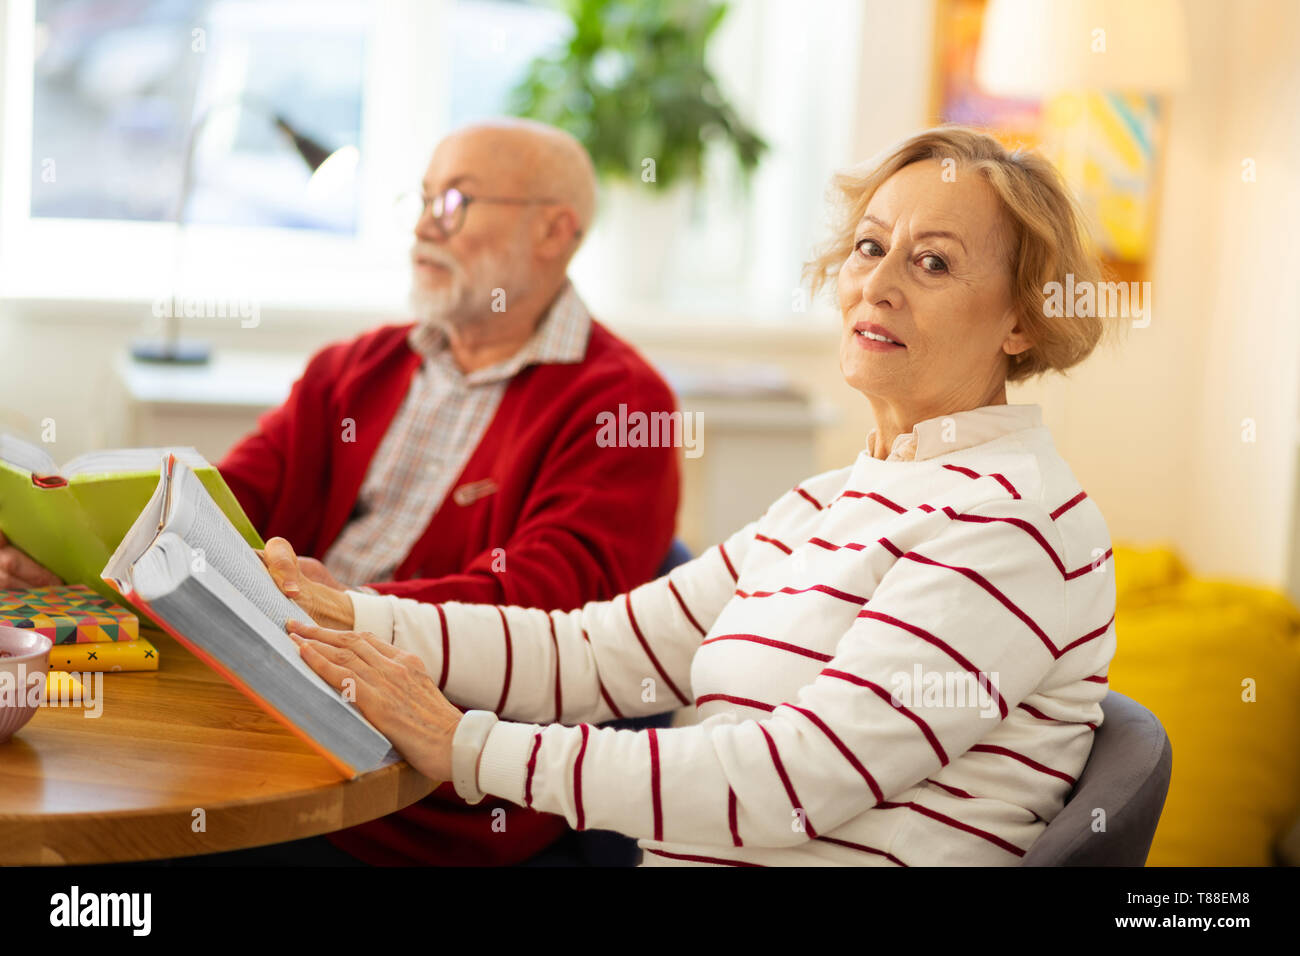 Nice good looking woman sitting with a book Stock Photo